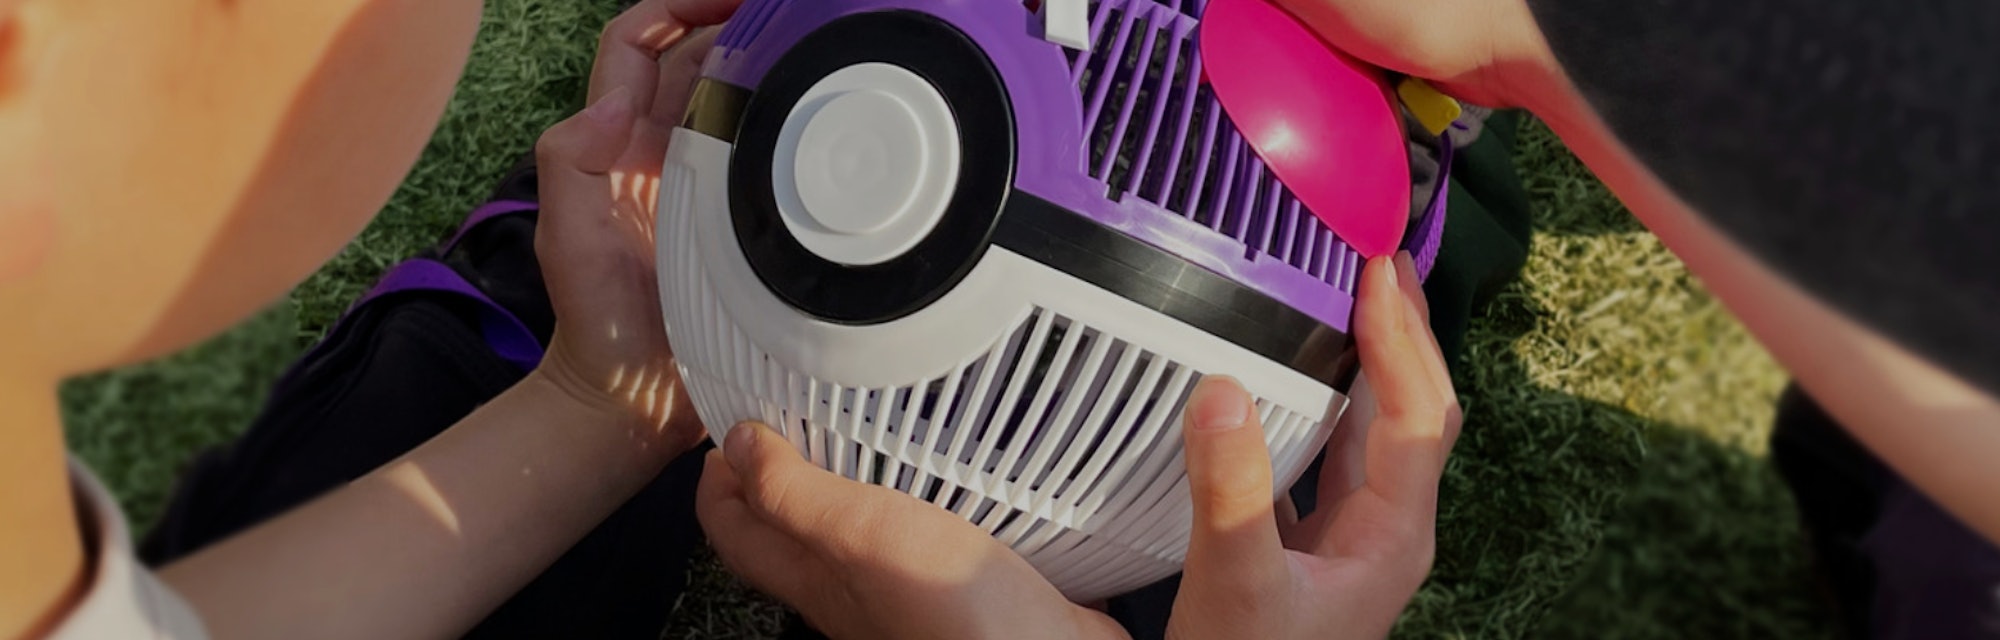 Children in Japan will soon be able to catch bugs in a Pokémon-themed bug catcher.